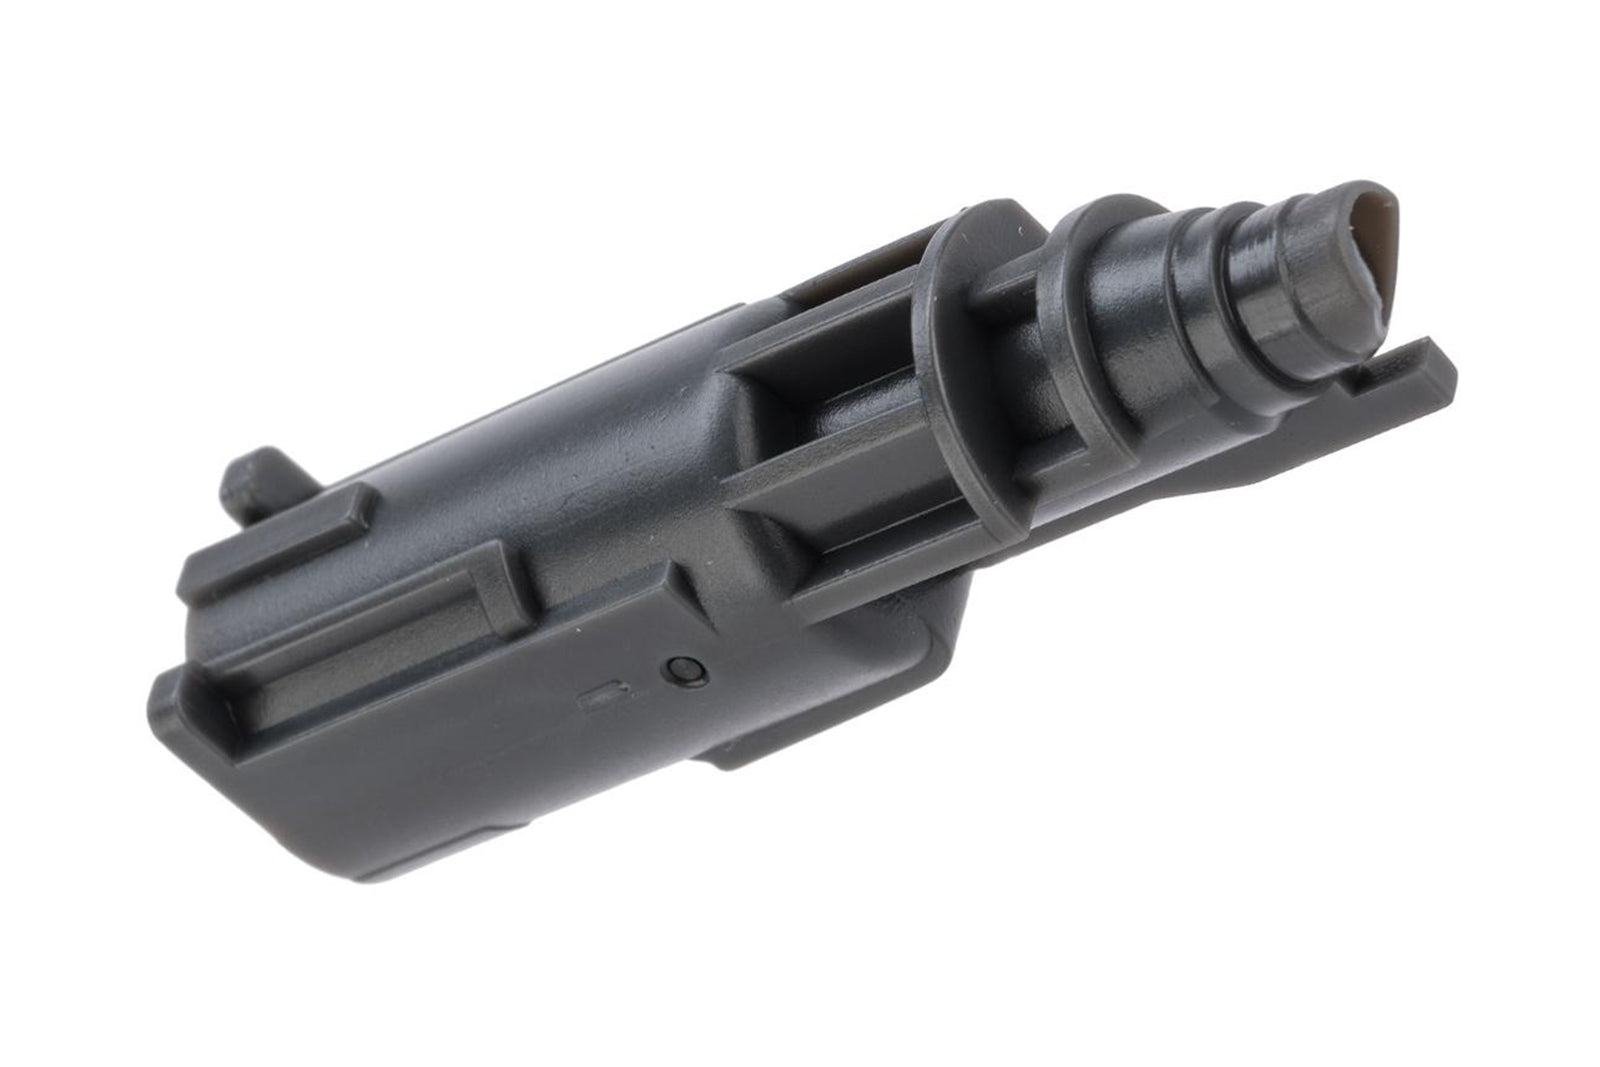 Guarder - Light Weight Nozzle Housing - for TM G Series 17 / 26 & KJW G 23 / 27 Airsoft GBB Pistols